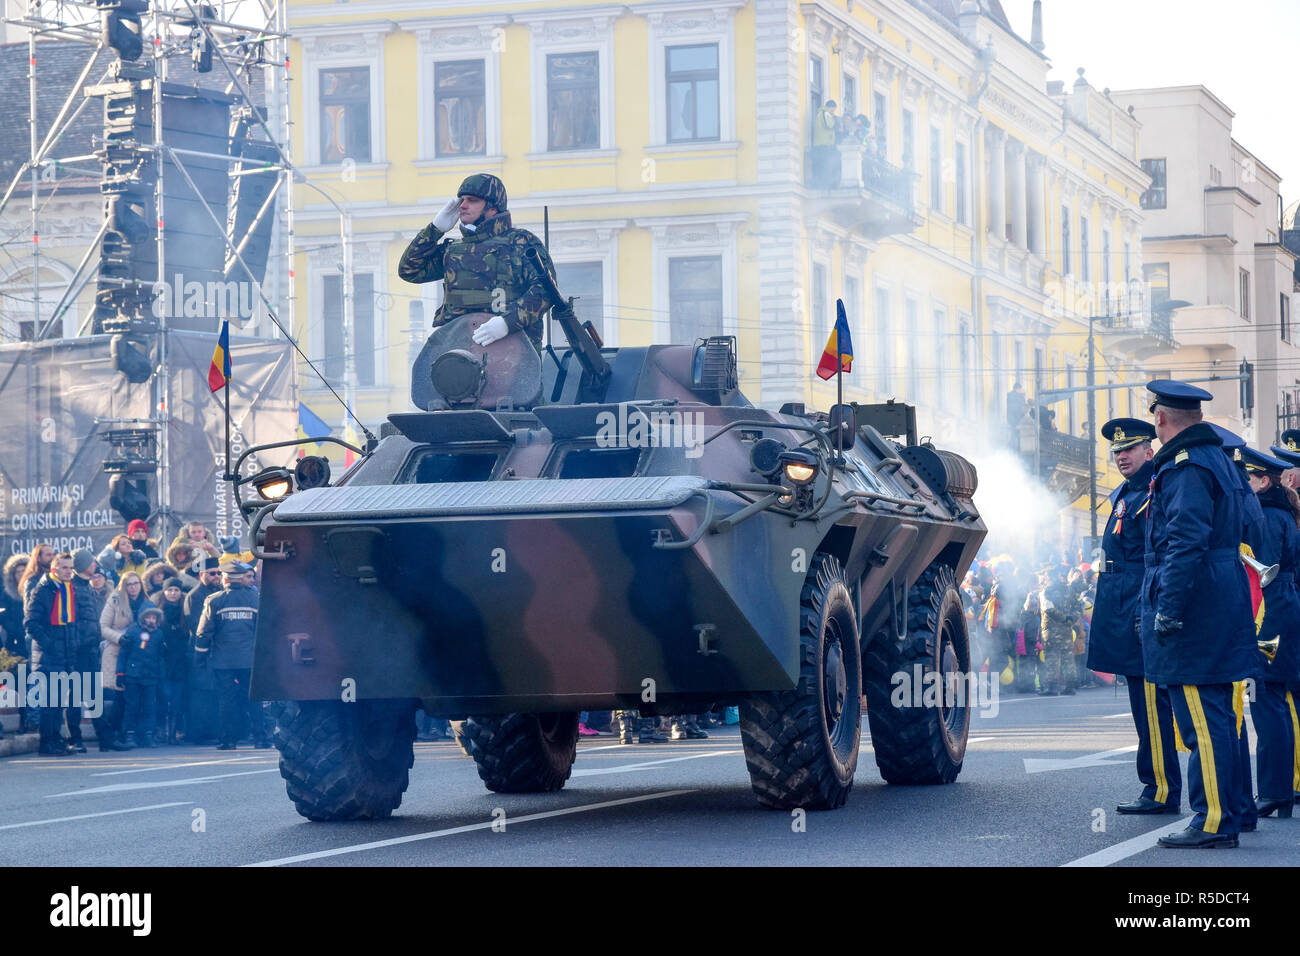 Cluj-Napoca, Romania, 01 December 2018.  Romania celebrates 100 years since the Great Unification with a military parade in Cluj-Napoca. Credit: Vadim Ungureanu / Alamy Live News Stock Photo